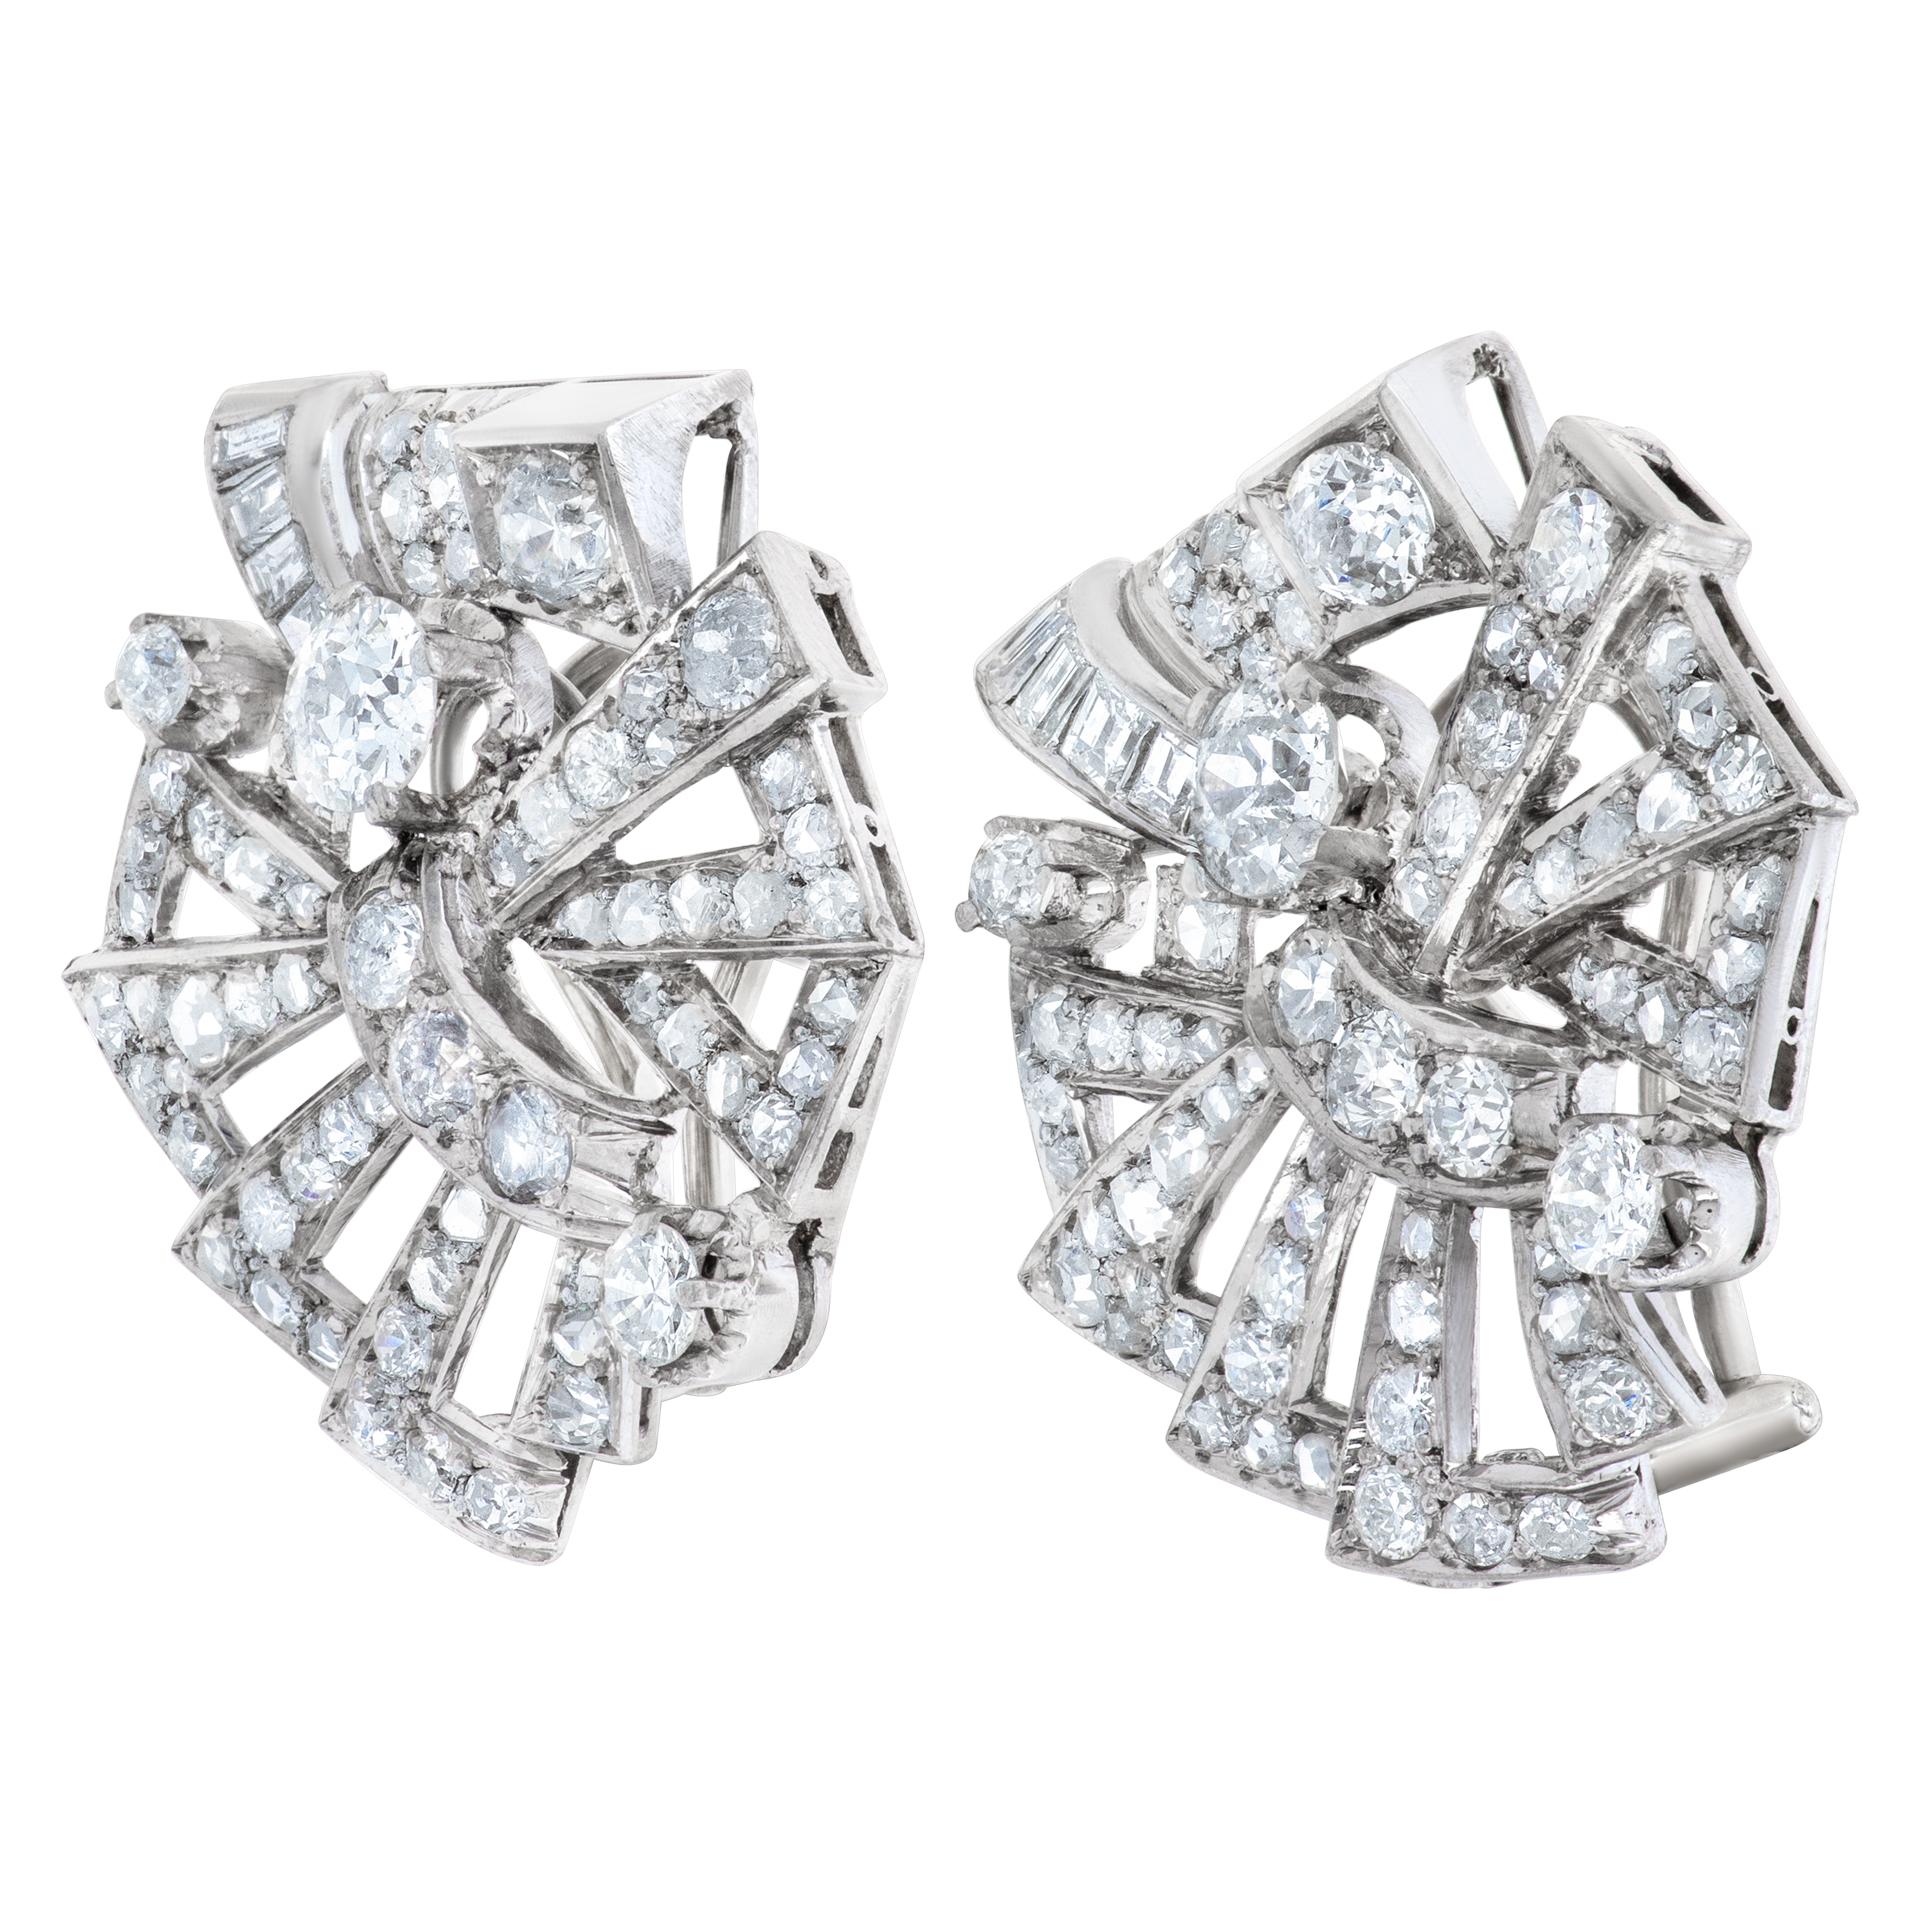 ESTIMATED RETAIL $30,000.00 - YOUR PRICE $13,800.00 - Antique pair of Art Deco diamond earrings with over 5 carats European, rose & baguette-cut diamonds set in 18k white gold. Post Omega clip for added security. All diamonds are white and